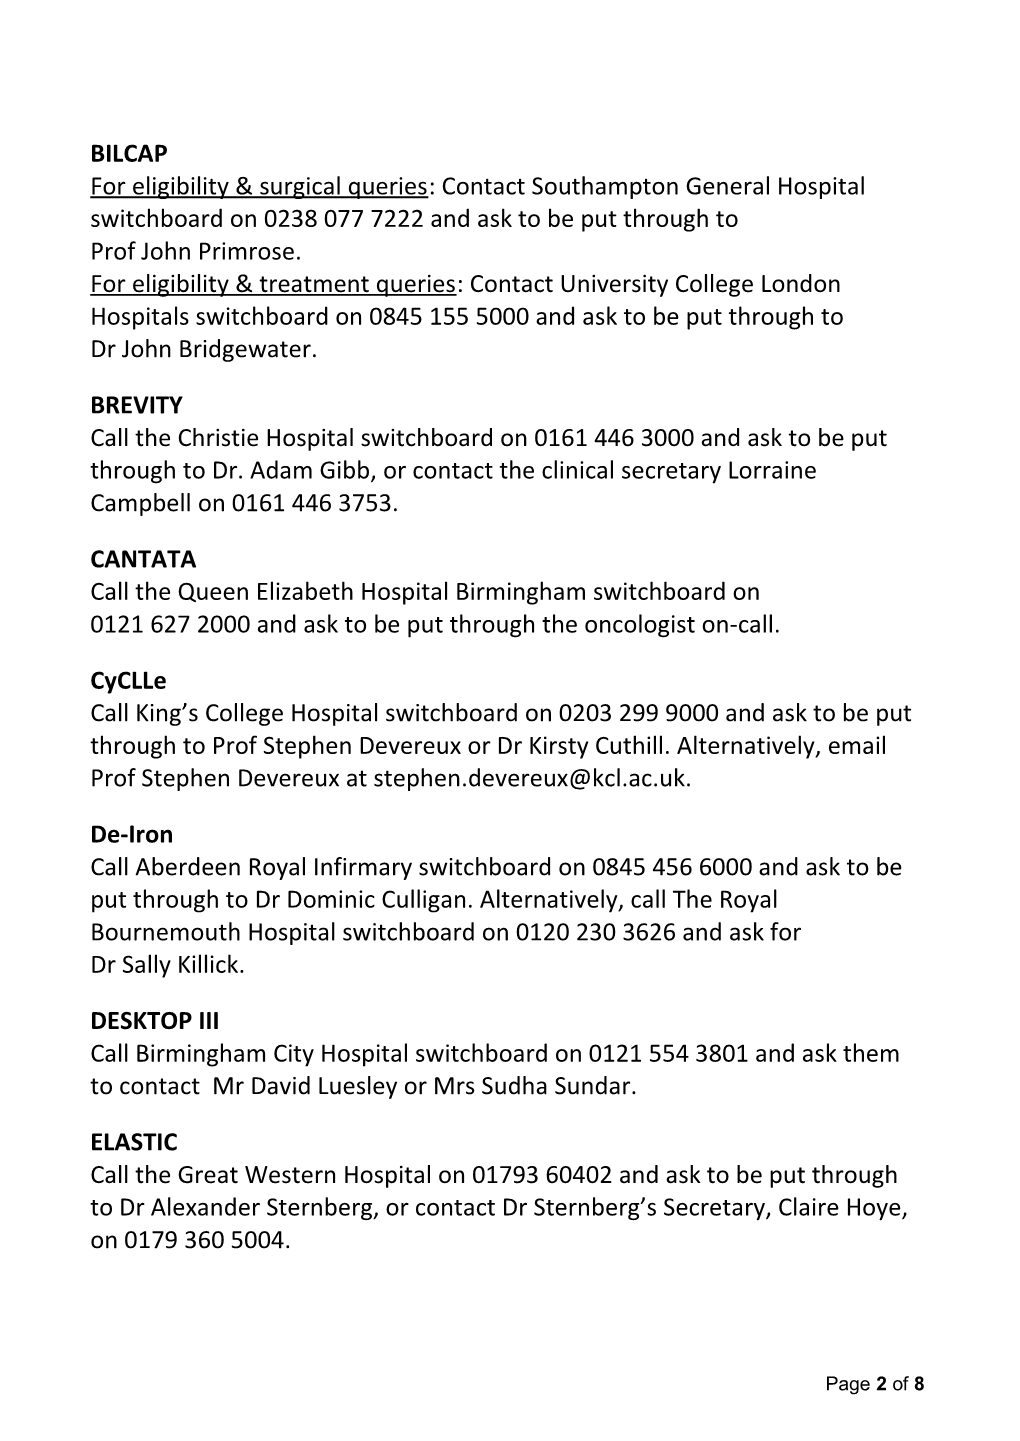 Emergency Clinical Contact Details During the Crctu